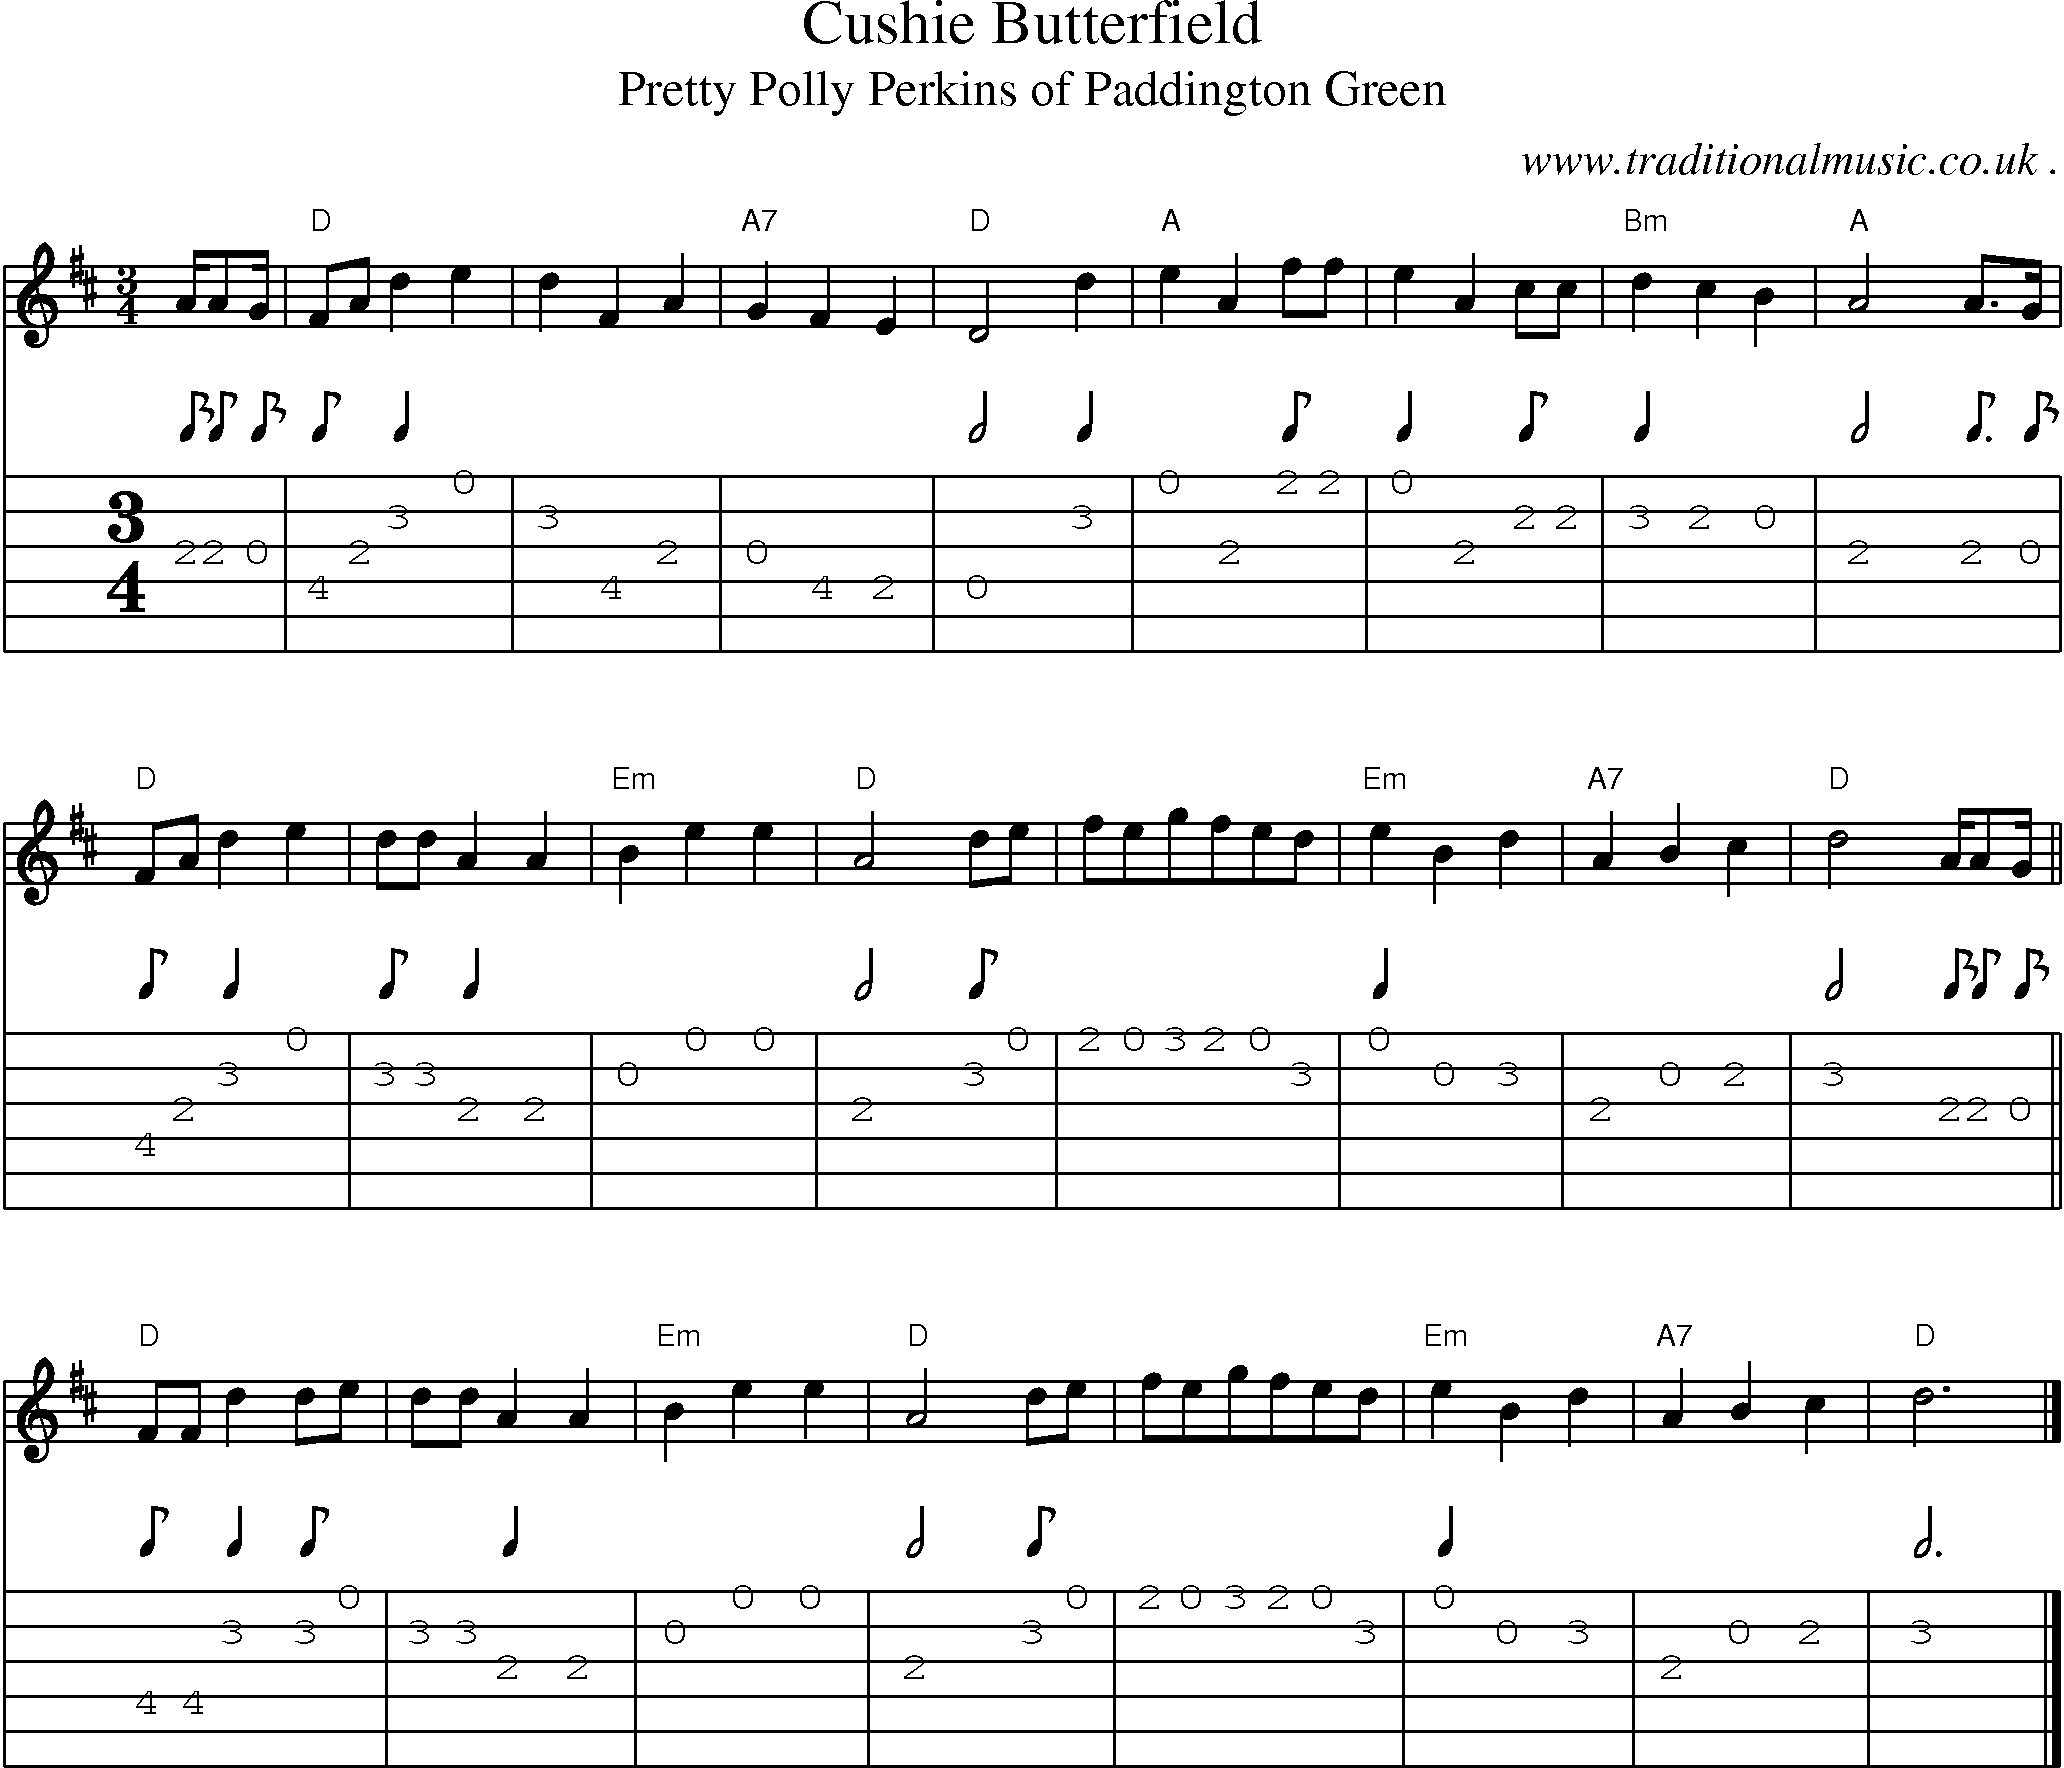 Music Score and Guitar Tabs for Cushie Butterfield